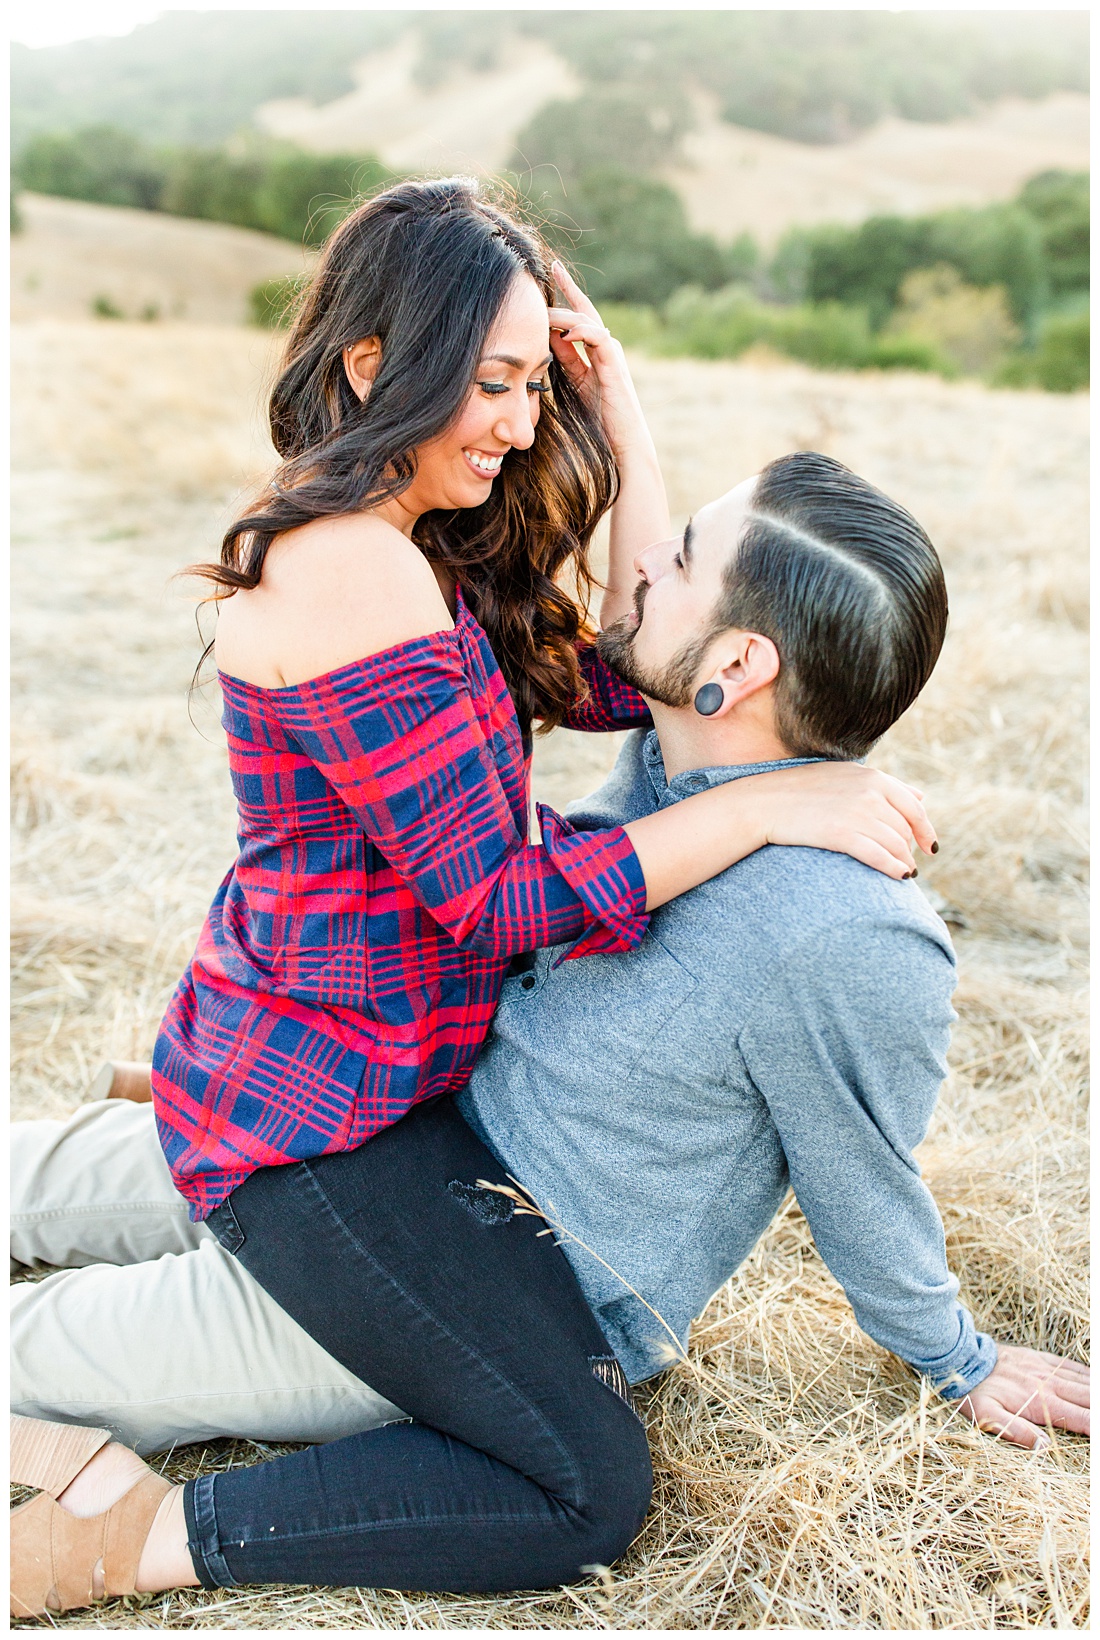 straddle pose at engagement session